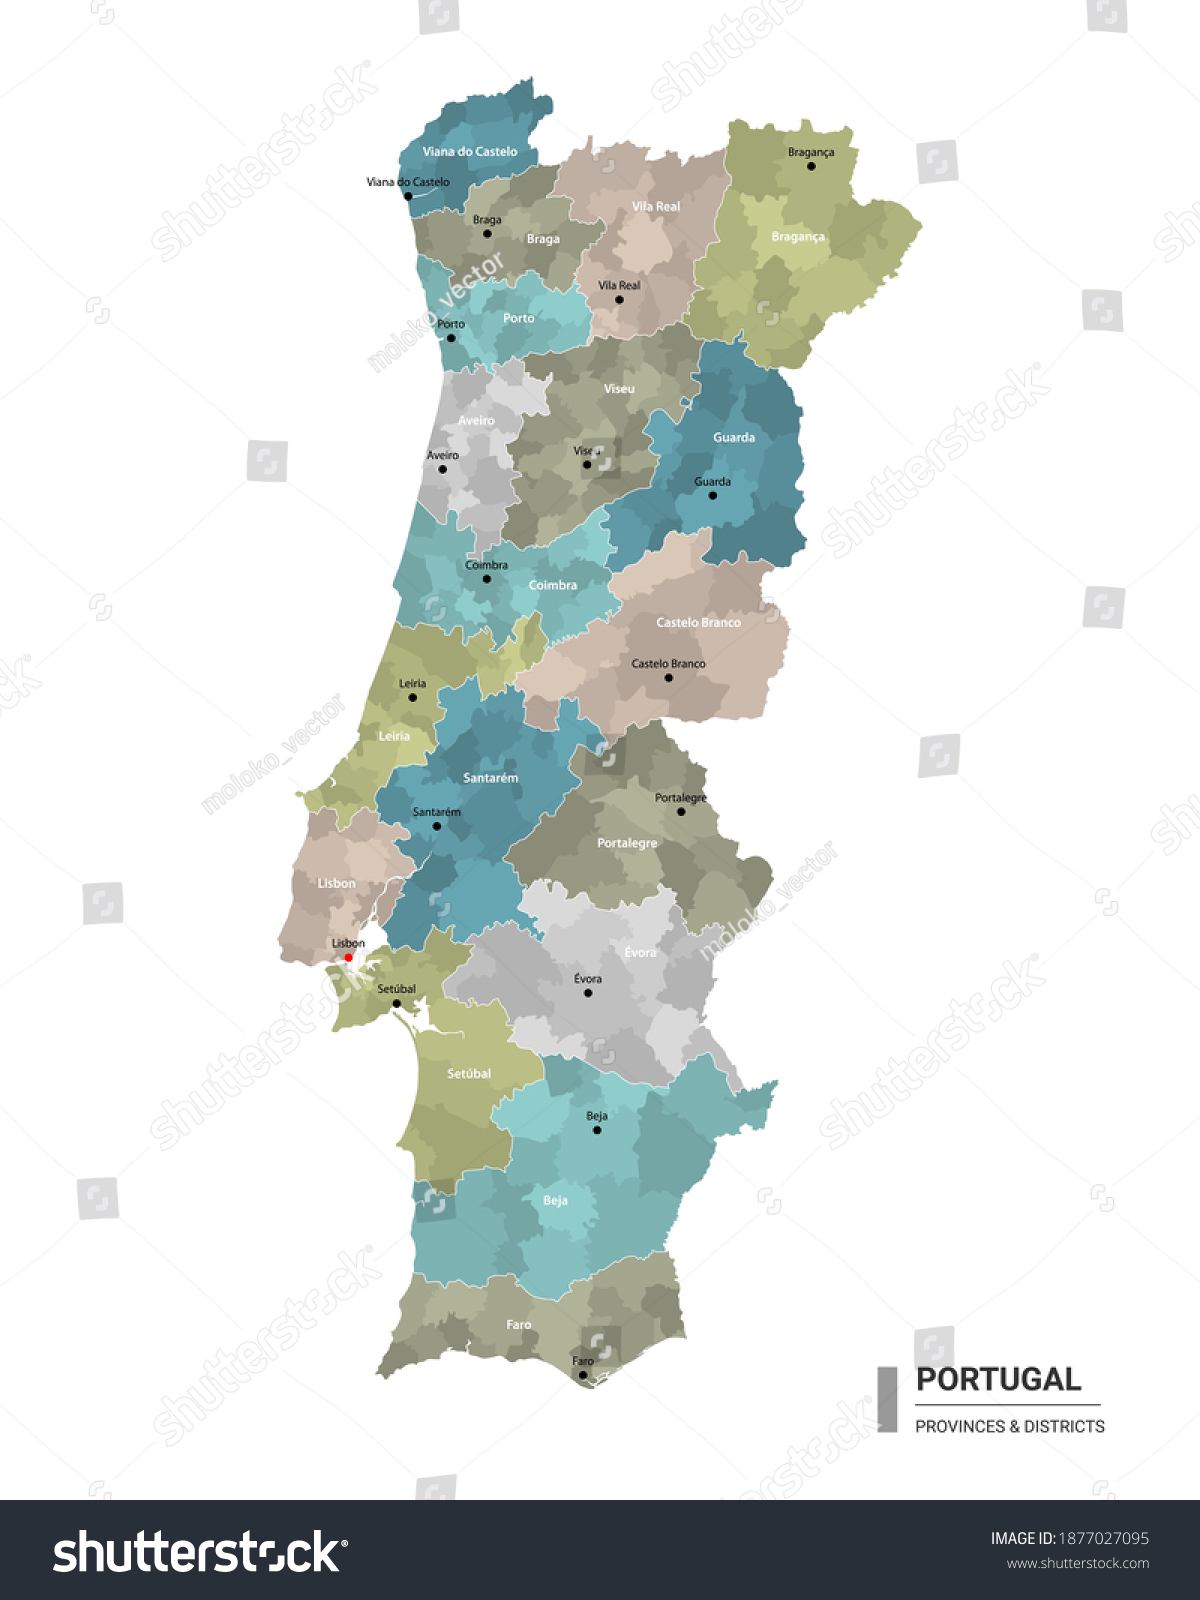 1 Administrative Map Of Portugal With Districts And Cities Name Colored By States And 2850